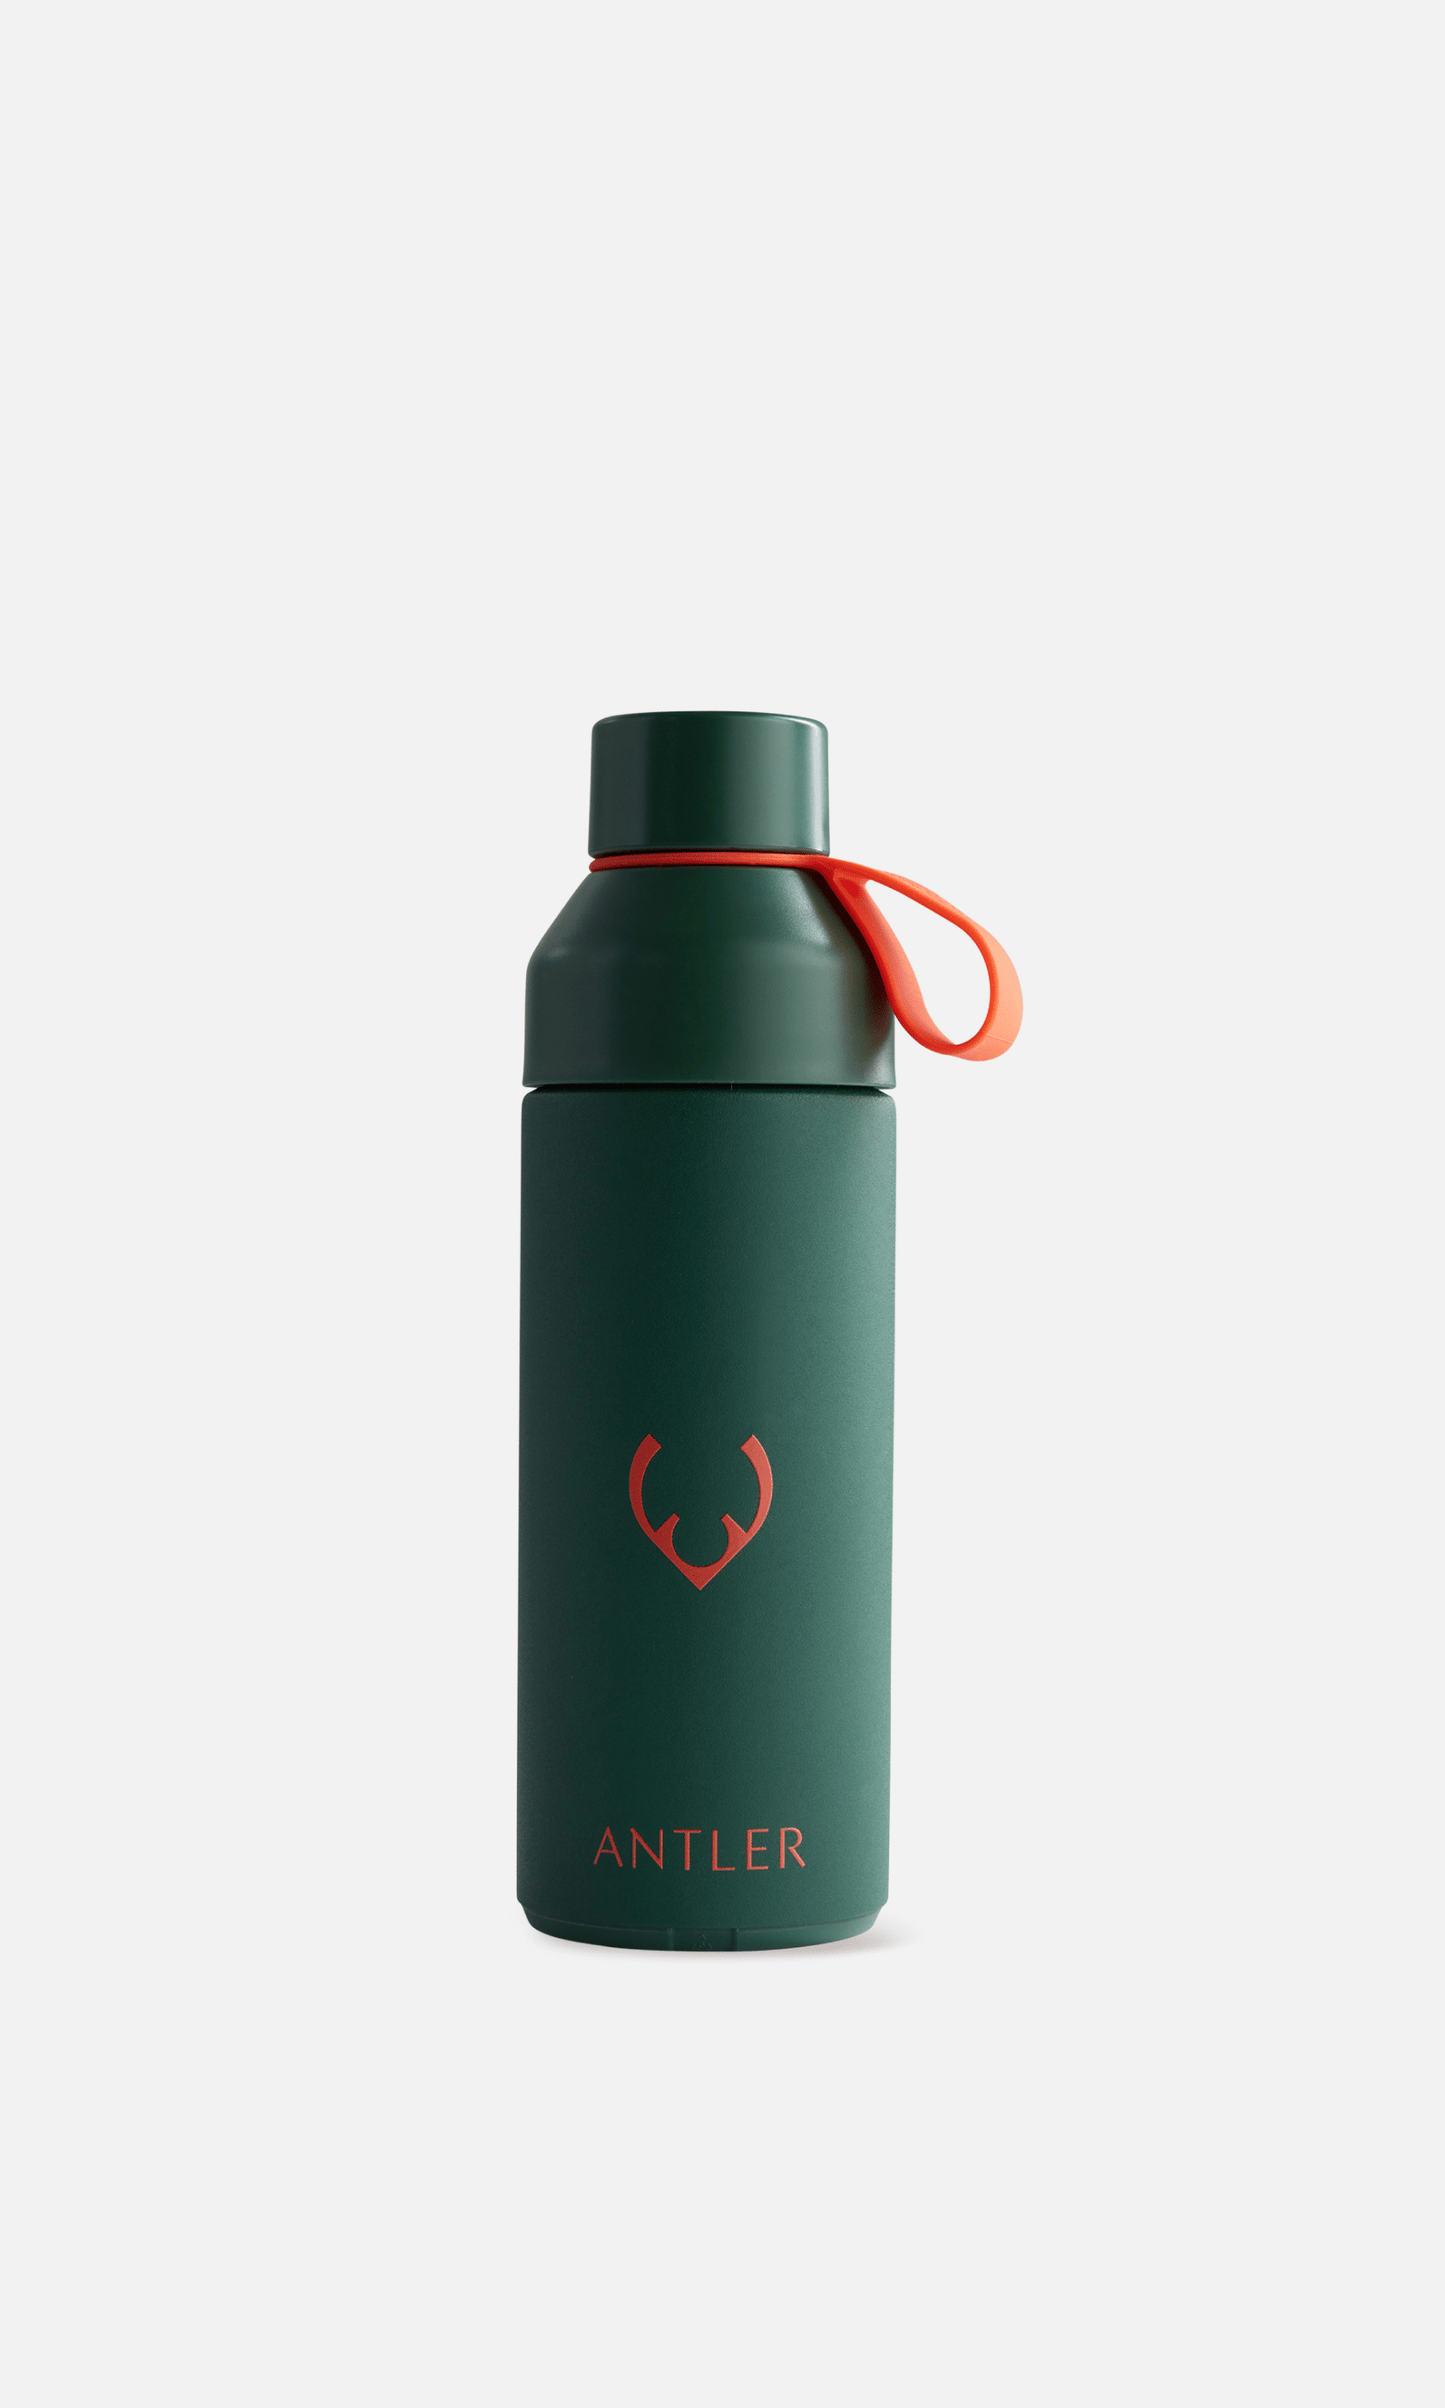 Antler Luggage -  Accessories bundle in green and coral - Travel Accessories Travel Accessories Bundle | Water Bottle | Green Tag | Coral Strap